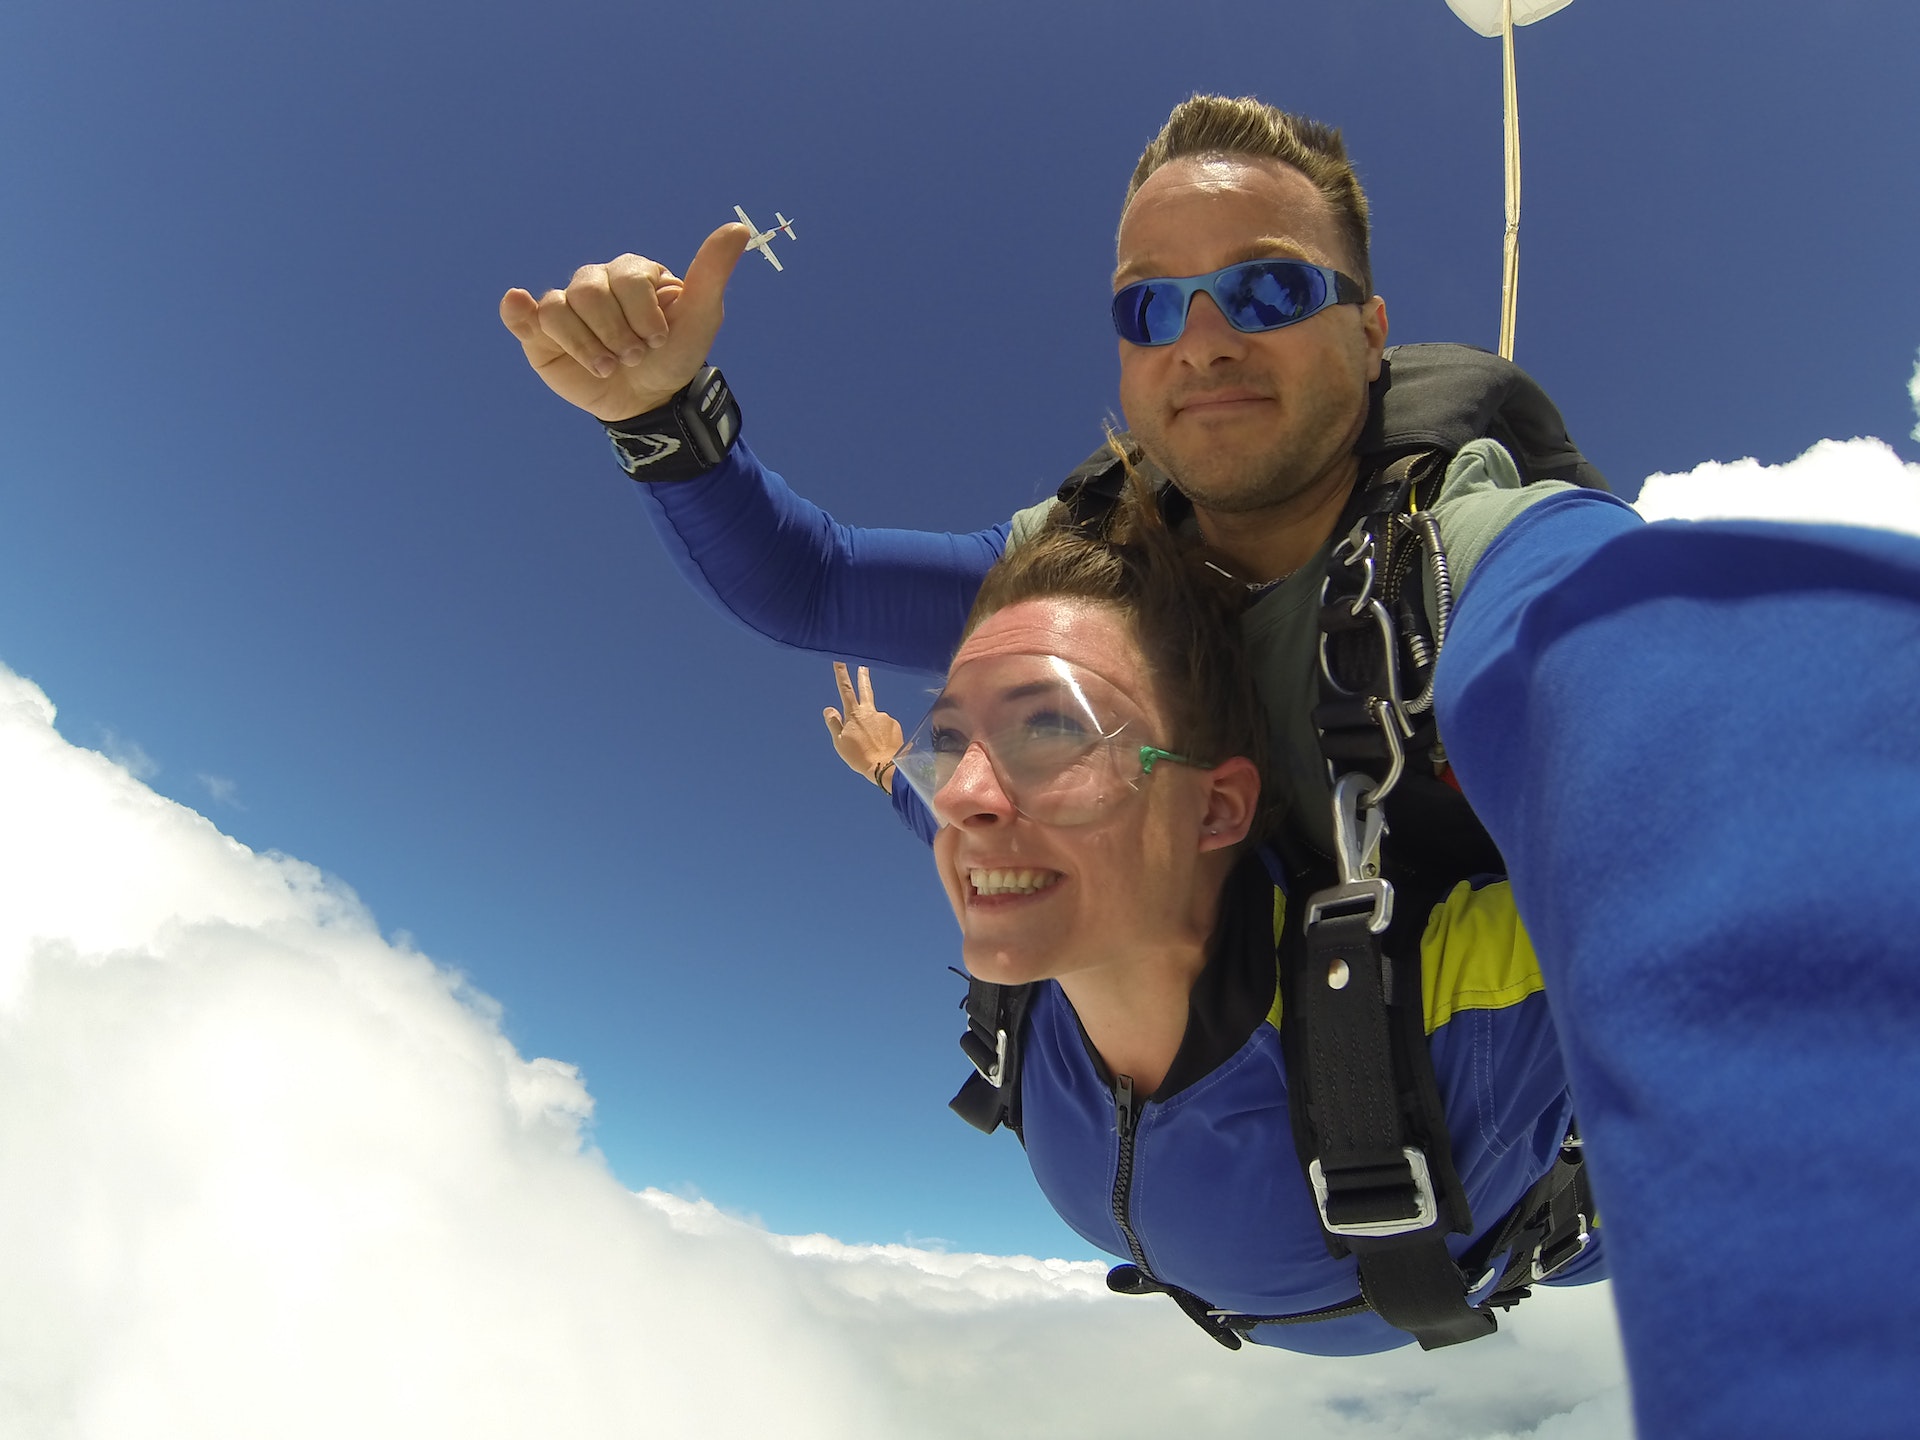 The Skydiving Instructor